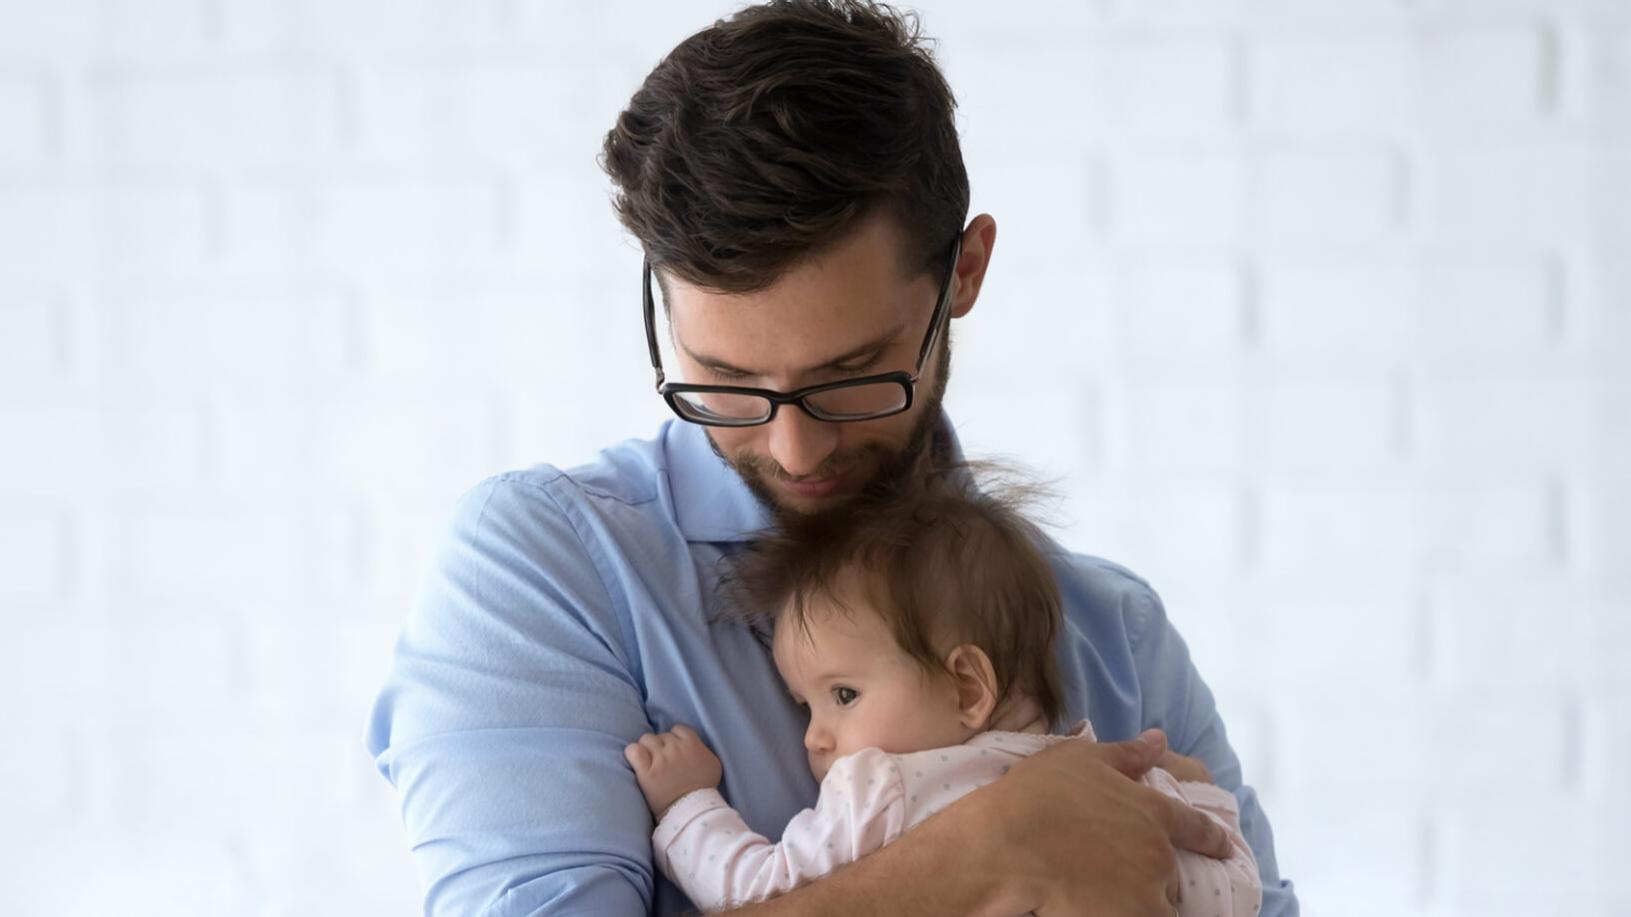 A shortsighted man wearing glasses holding a toddler.